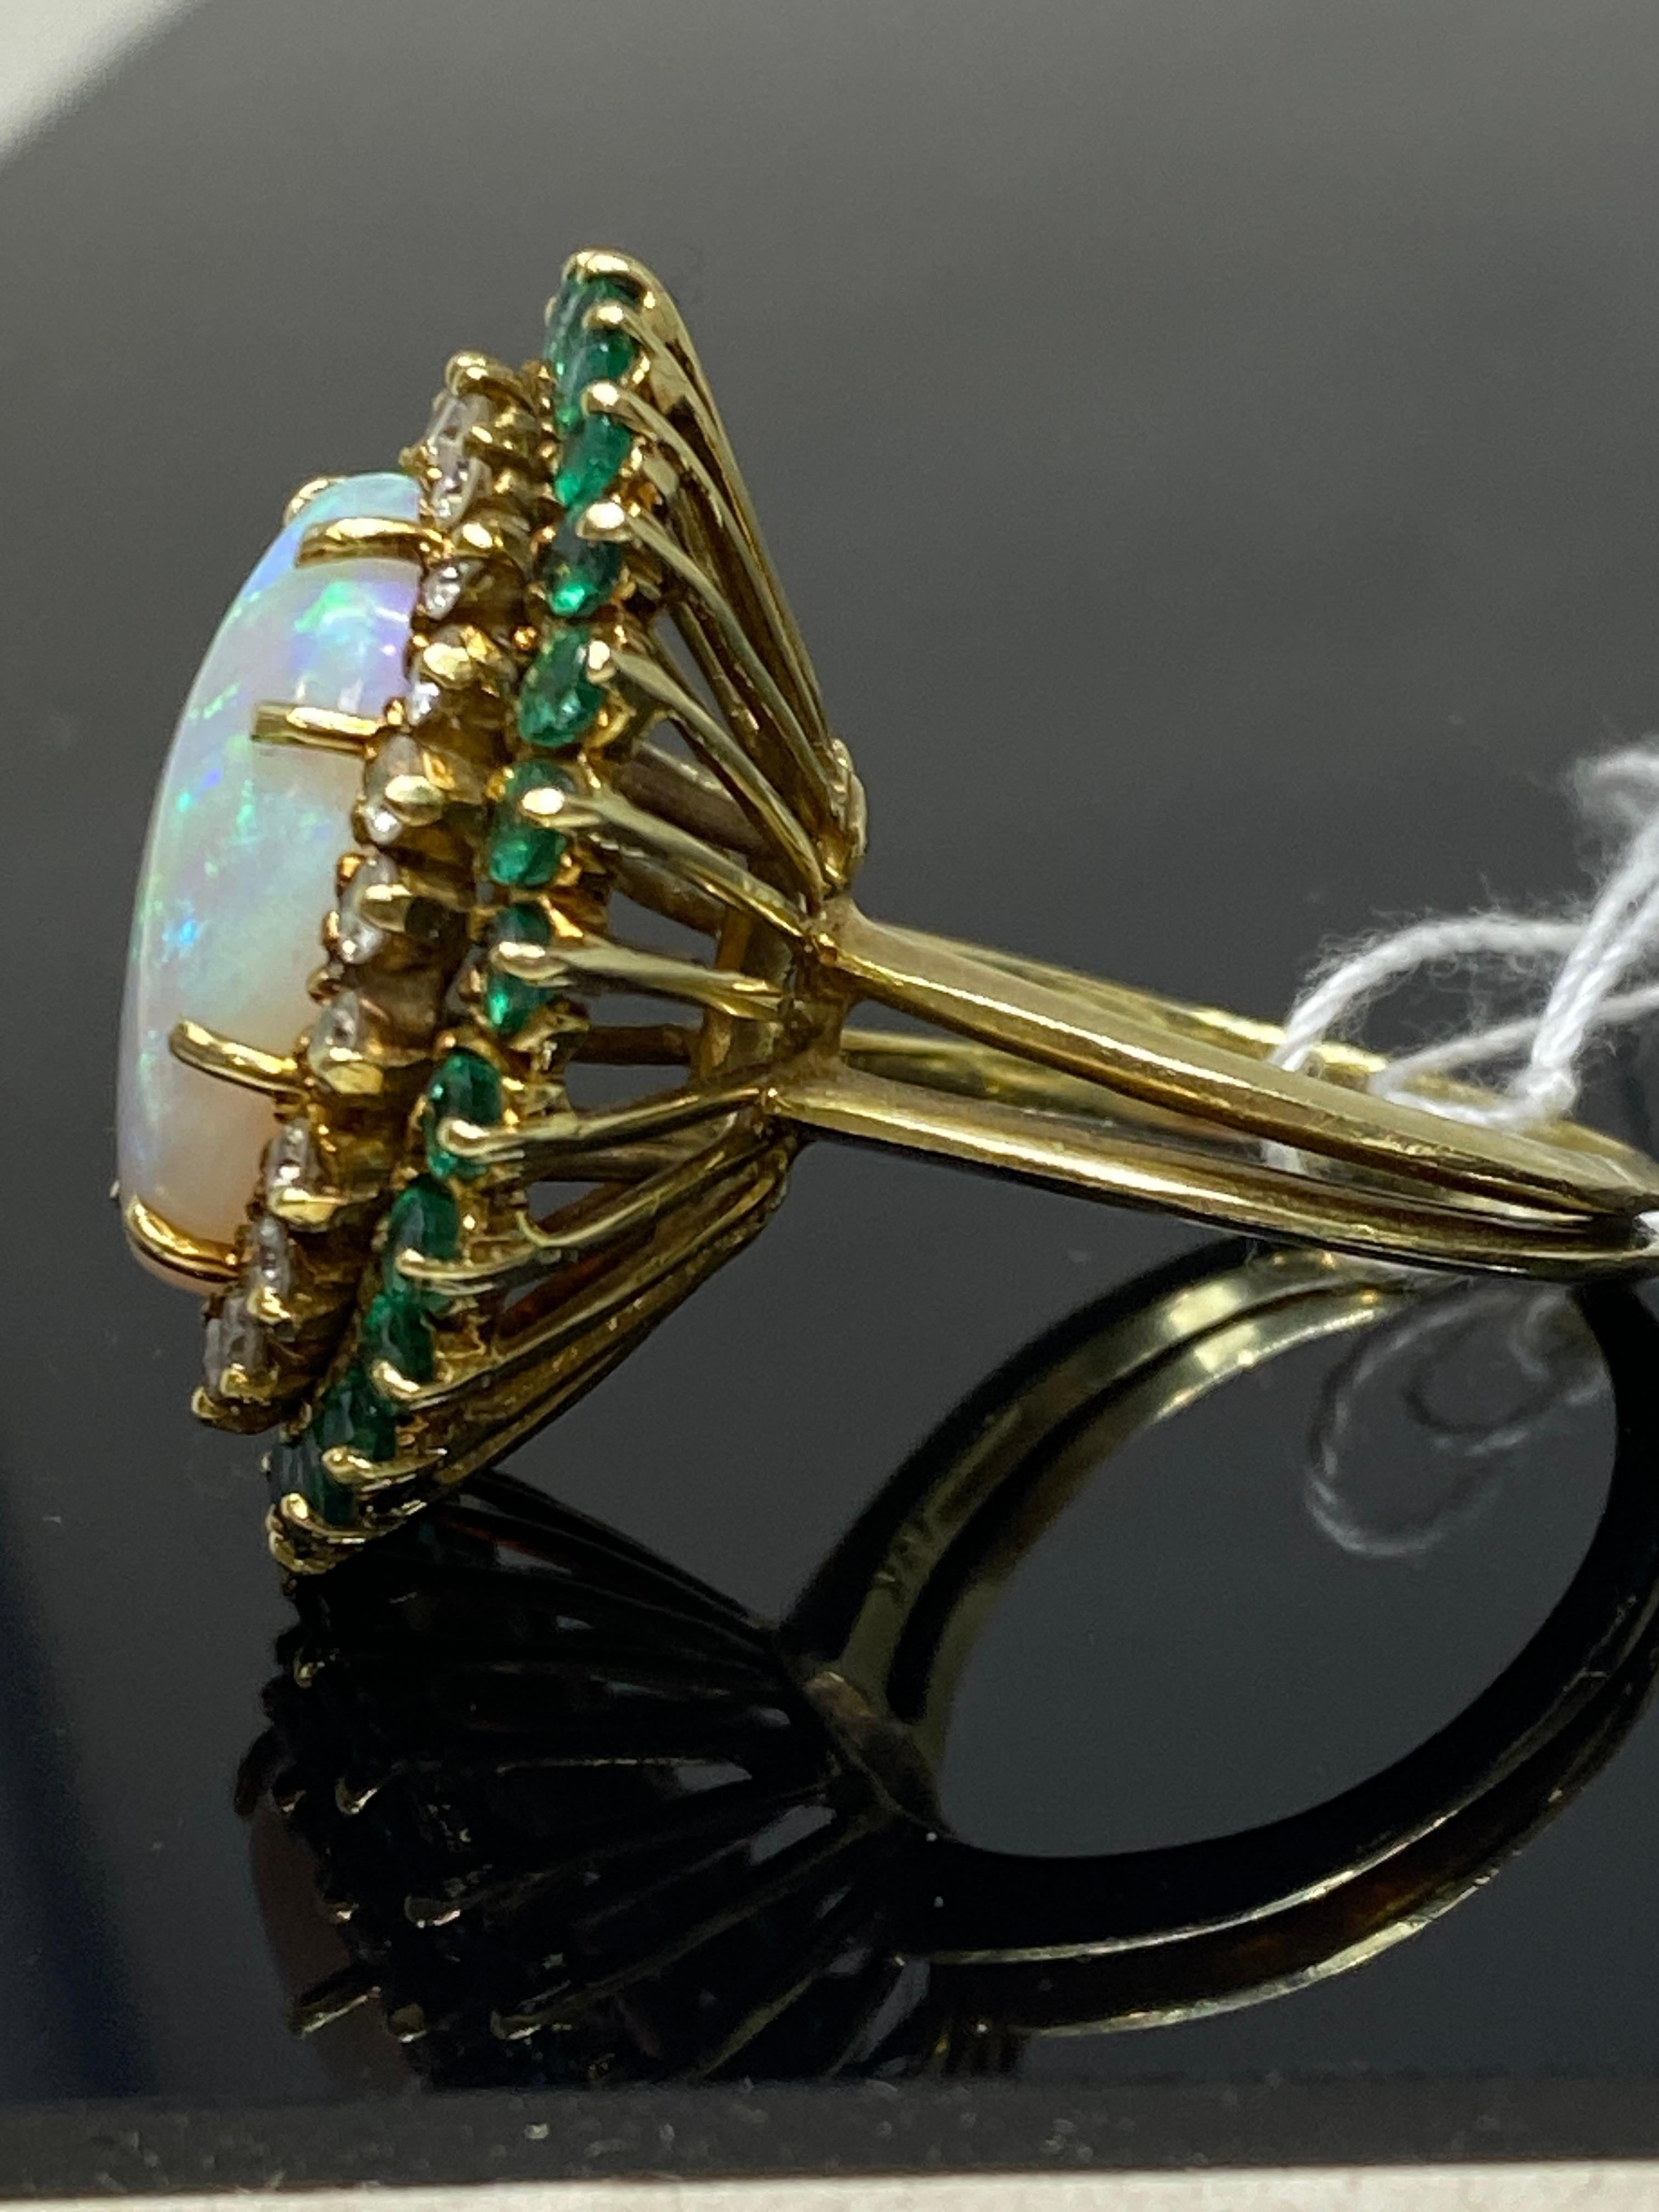 We instantly fell in love with showstopper of a ring as soon as we saw it.  It features a large vibrant 7 carat opal at the center surrounded by a double halo of sparking natural near colorless diamonds and natural green emeralds. Crafted in 18